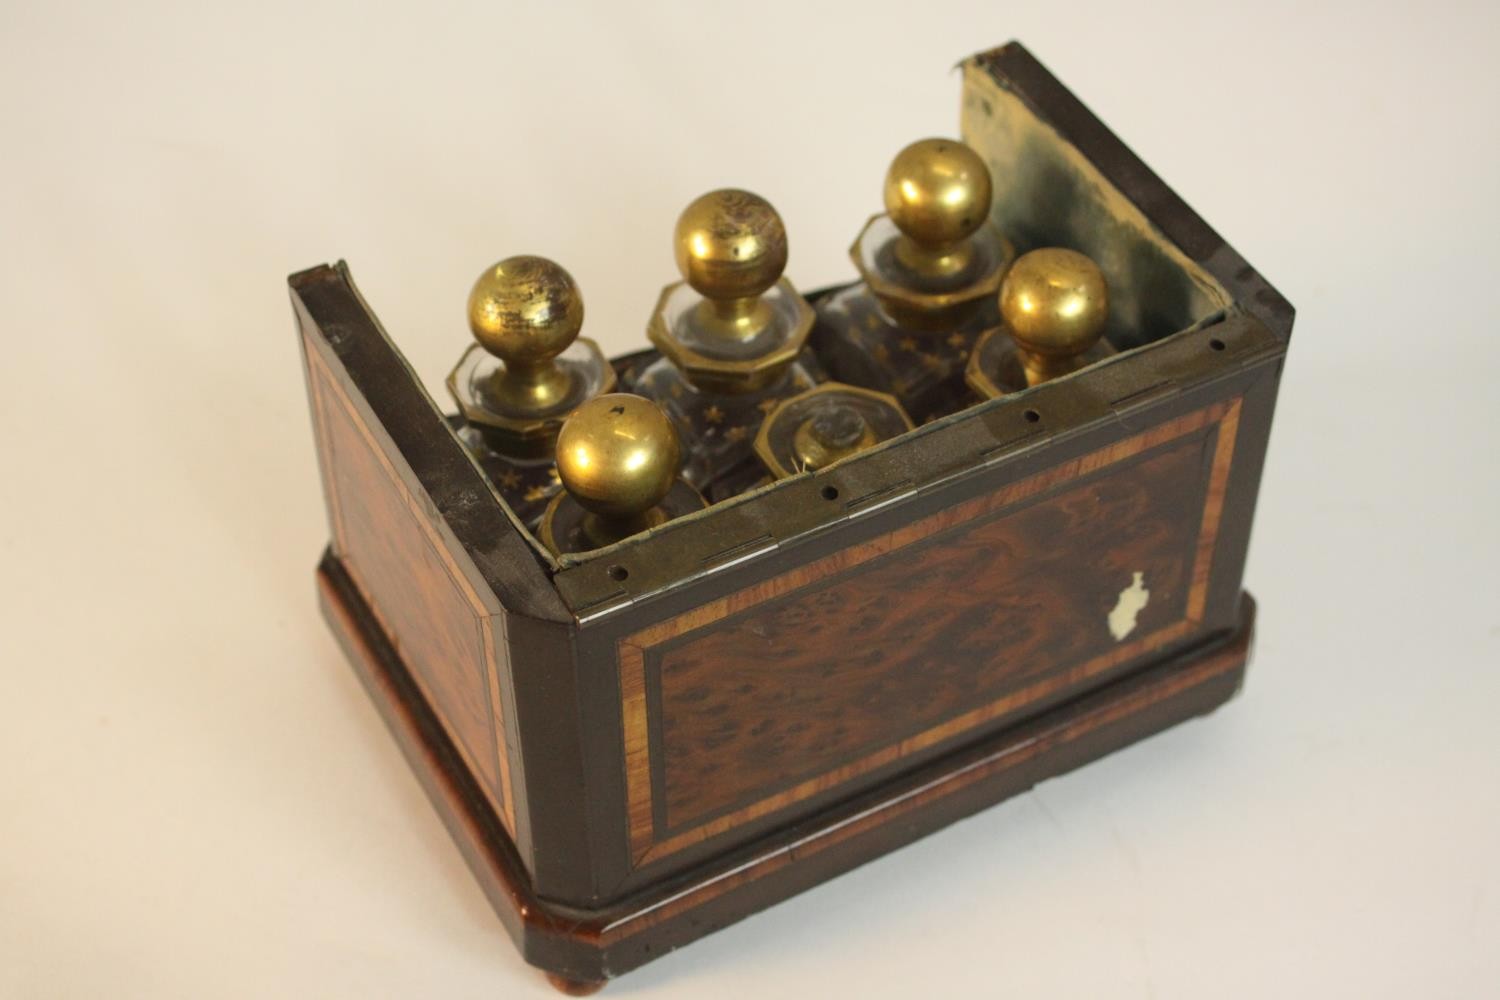 A 19th century six bottle perfume box, inlaid with burr wood panels, missing the front and lid, with - Image 9 of 9